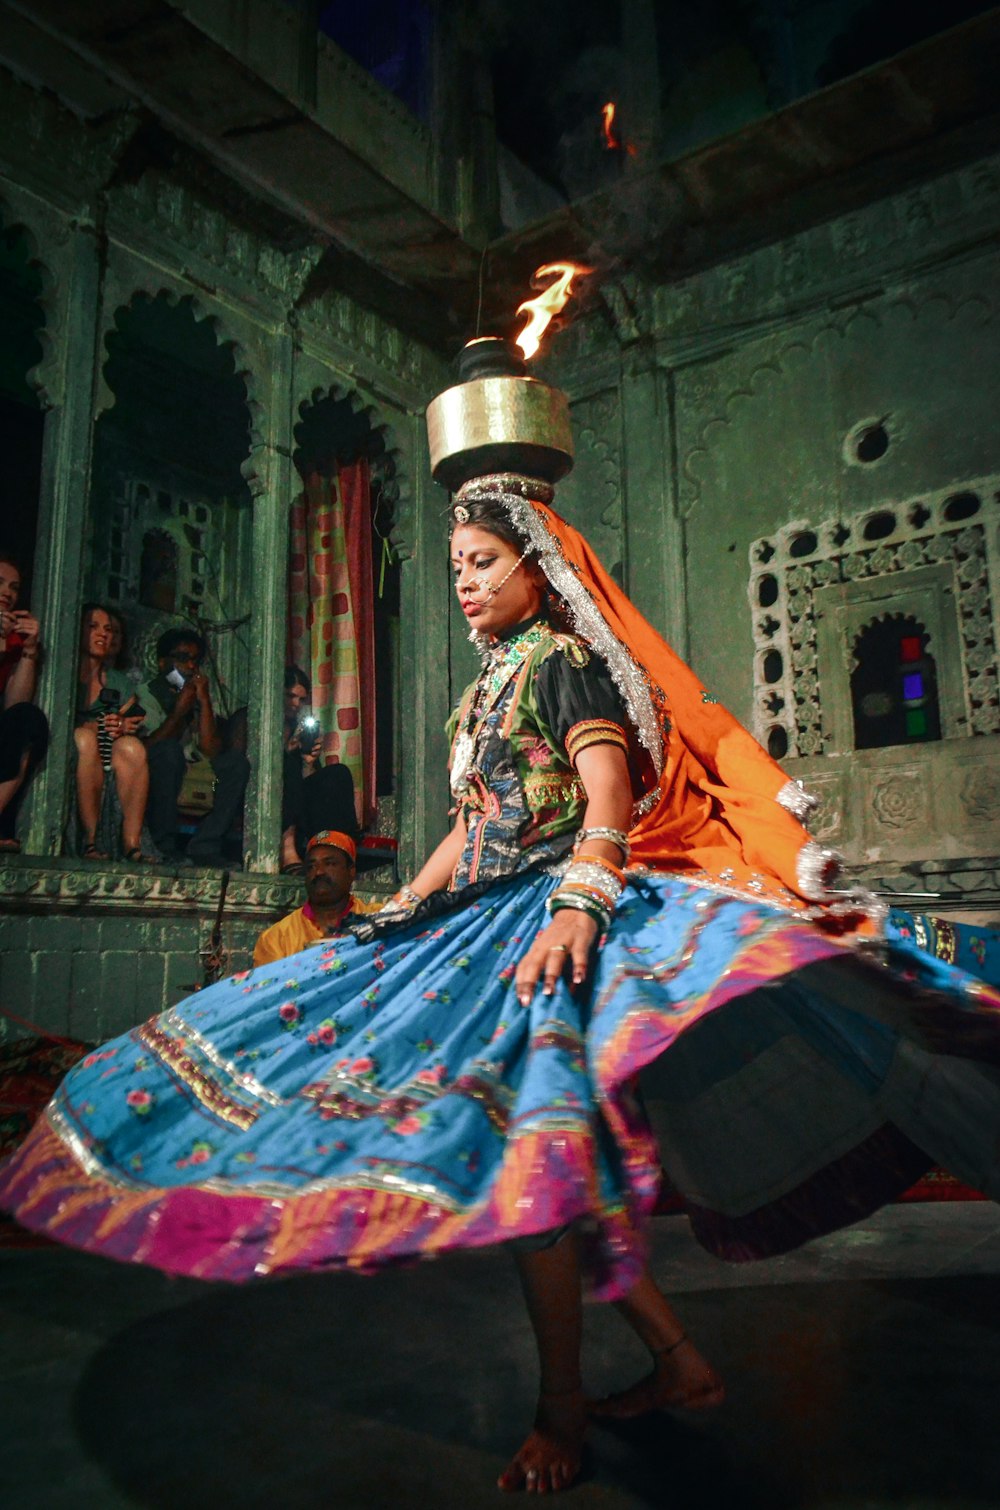 a woman in a colorful dress is performing a dance